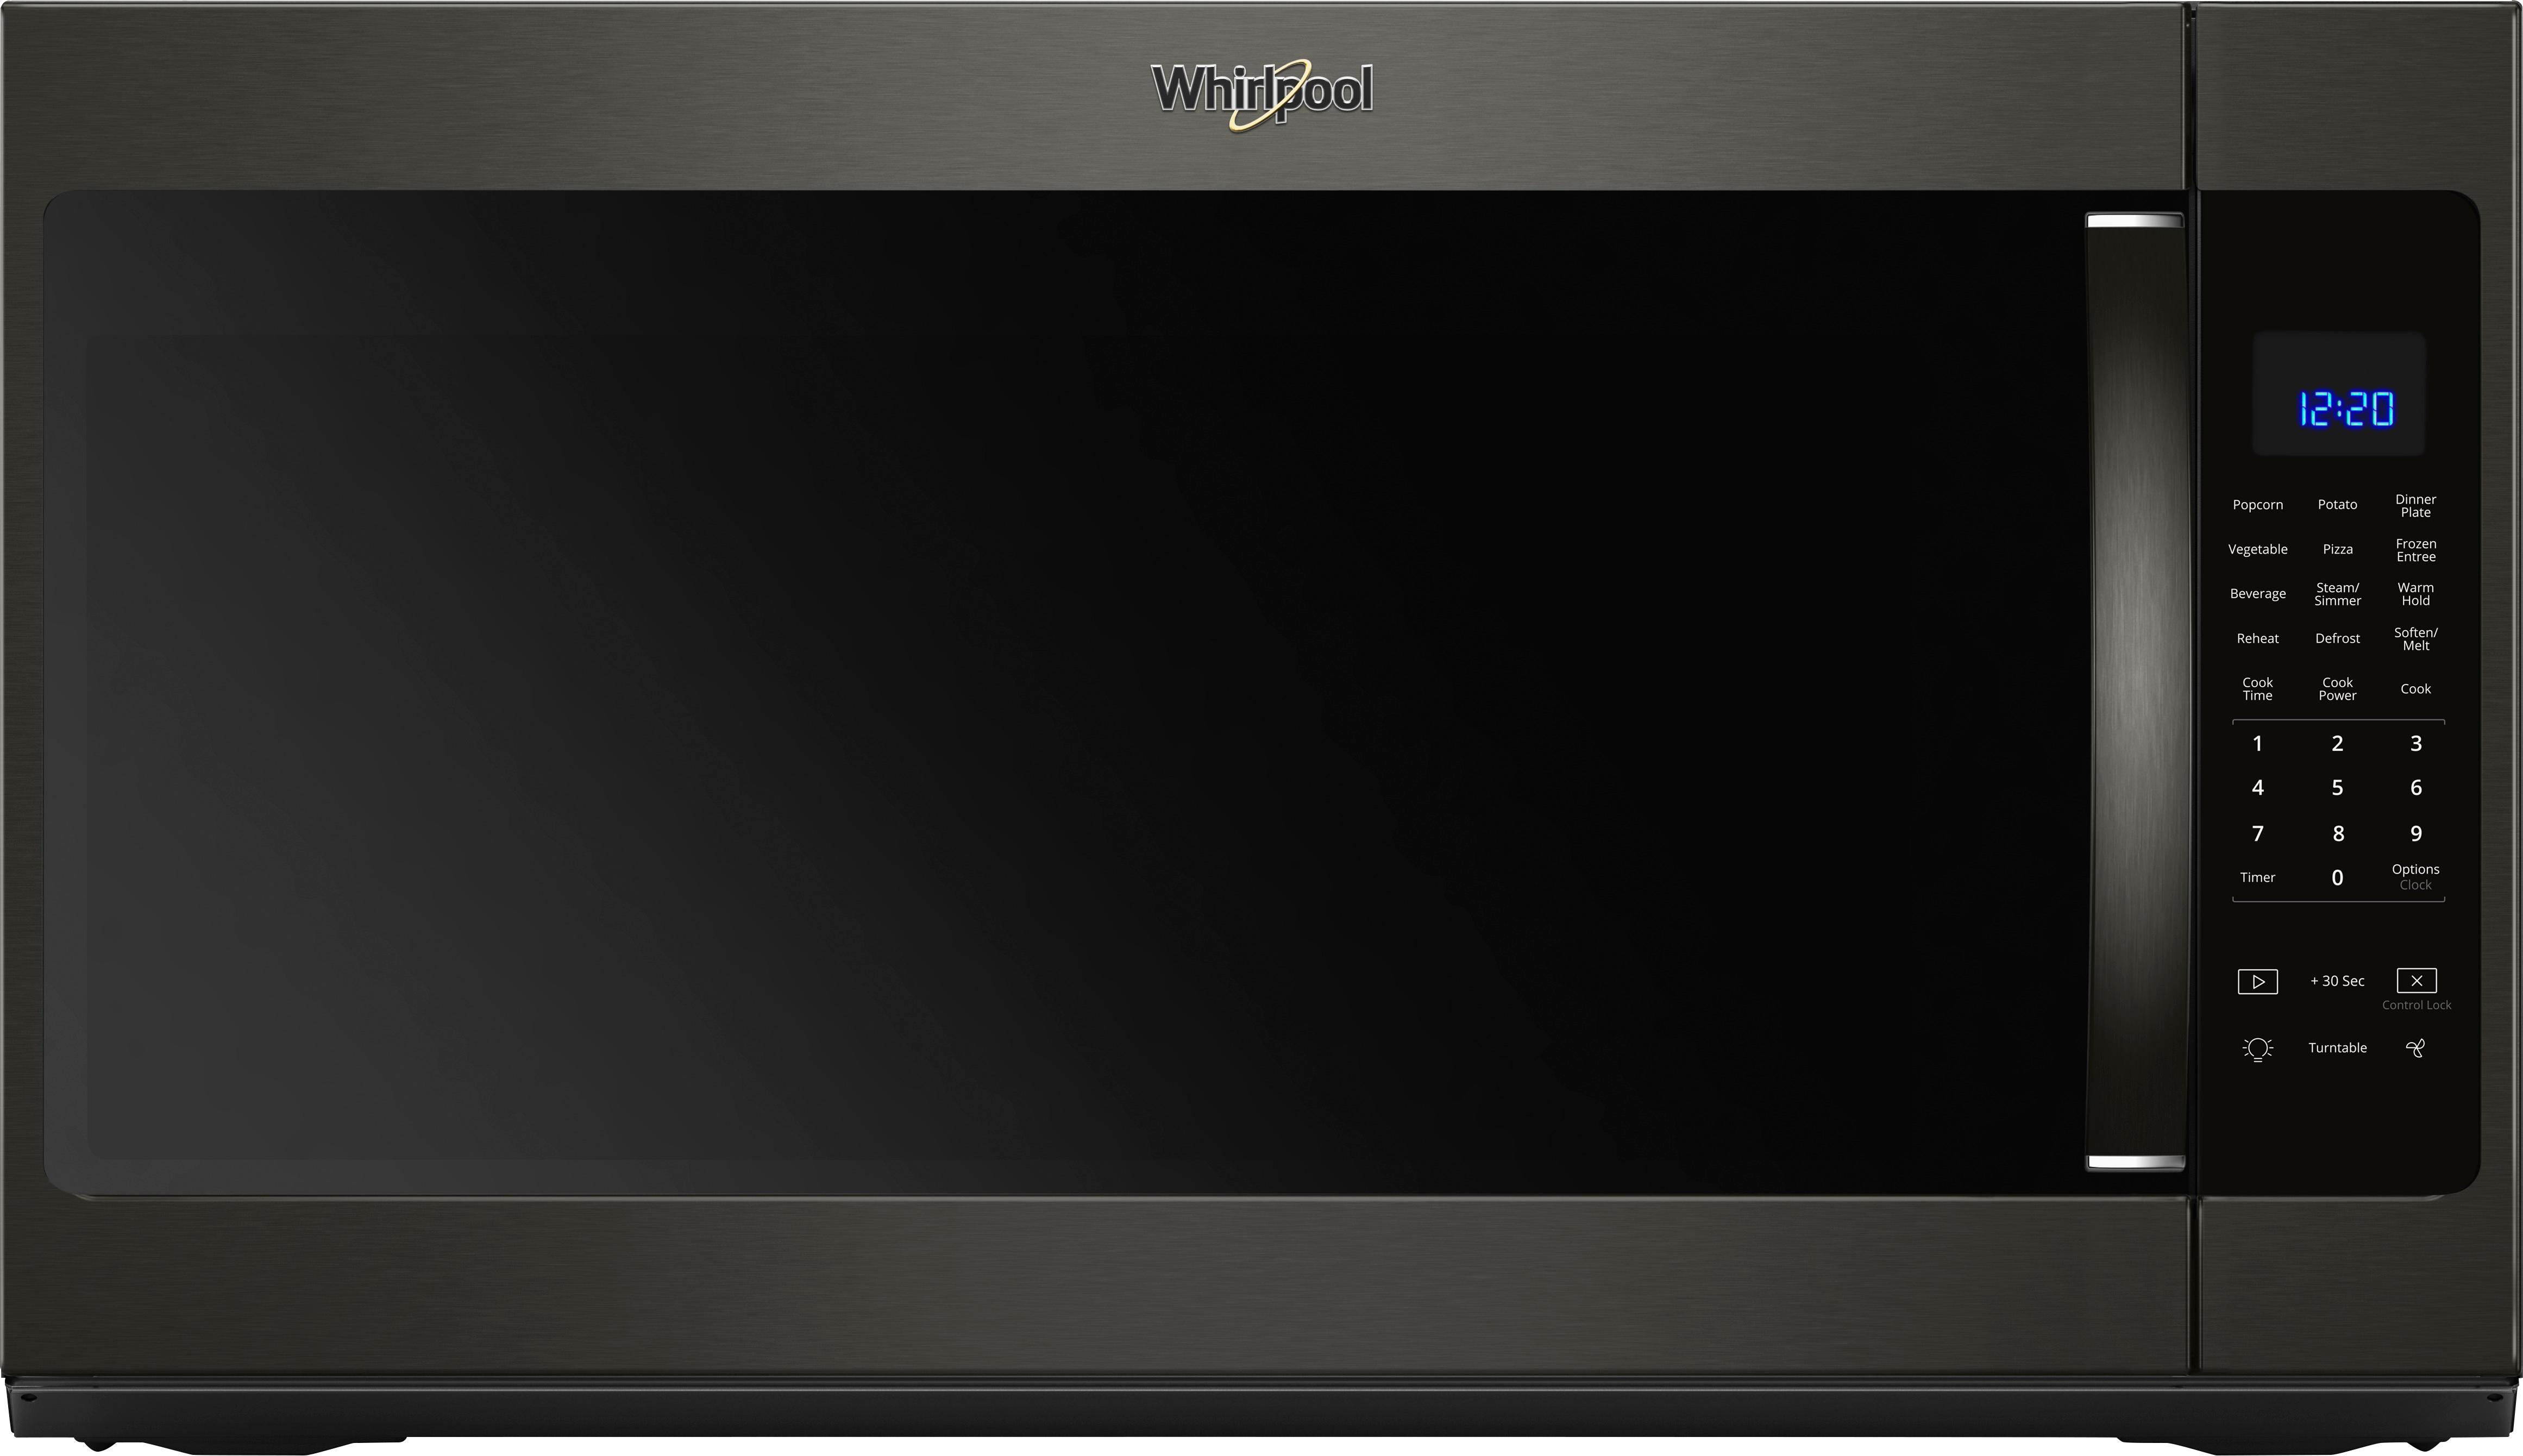 Whirlpool - 2.1 Cu. Ft. Over-the-Range Microwave with Sensor Cooking - Black stainless steel was $464.99 now $319.99 (31.0% off)